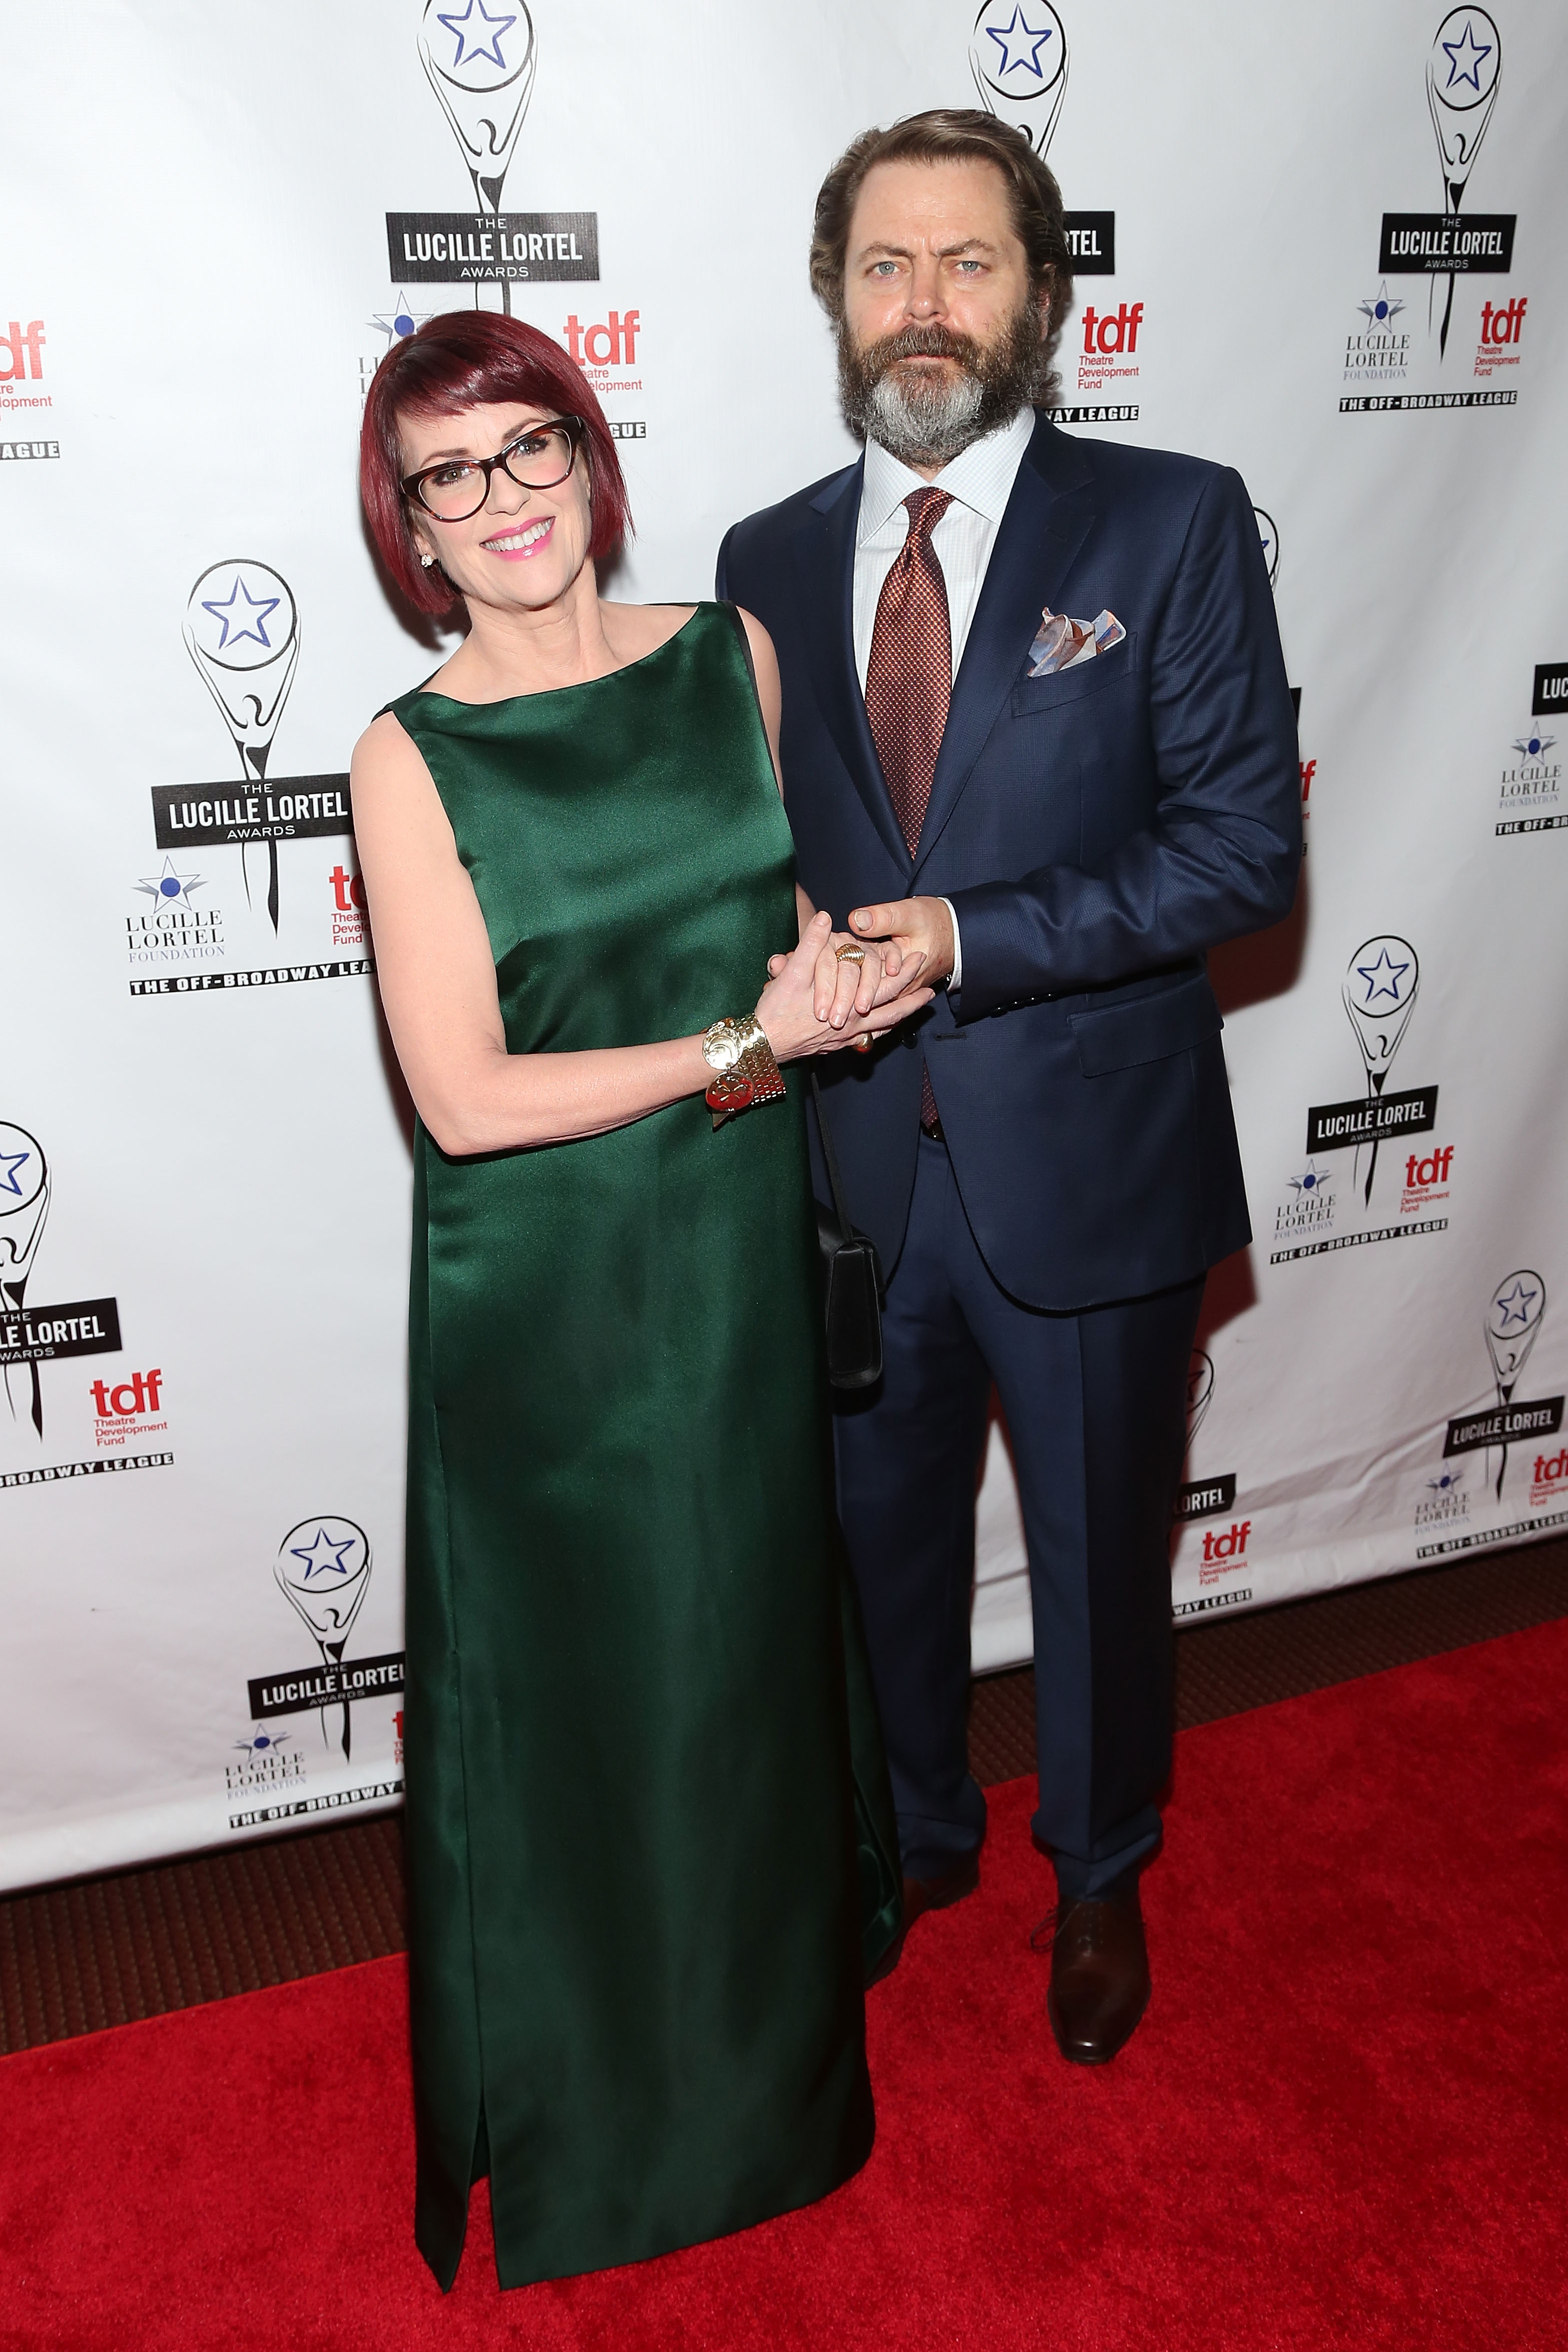 Parks and Recreation star Nick Offerman and Will and Grace actress Megan Mullaly have been married since 2003